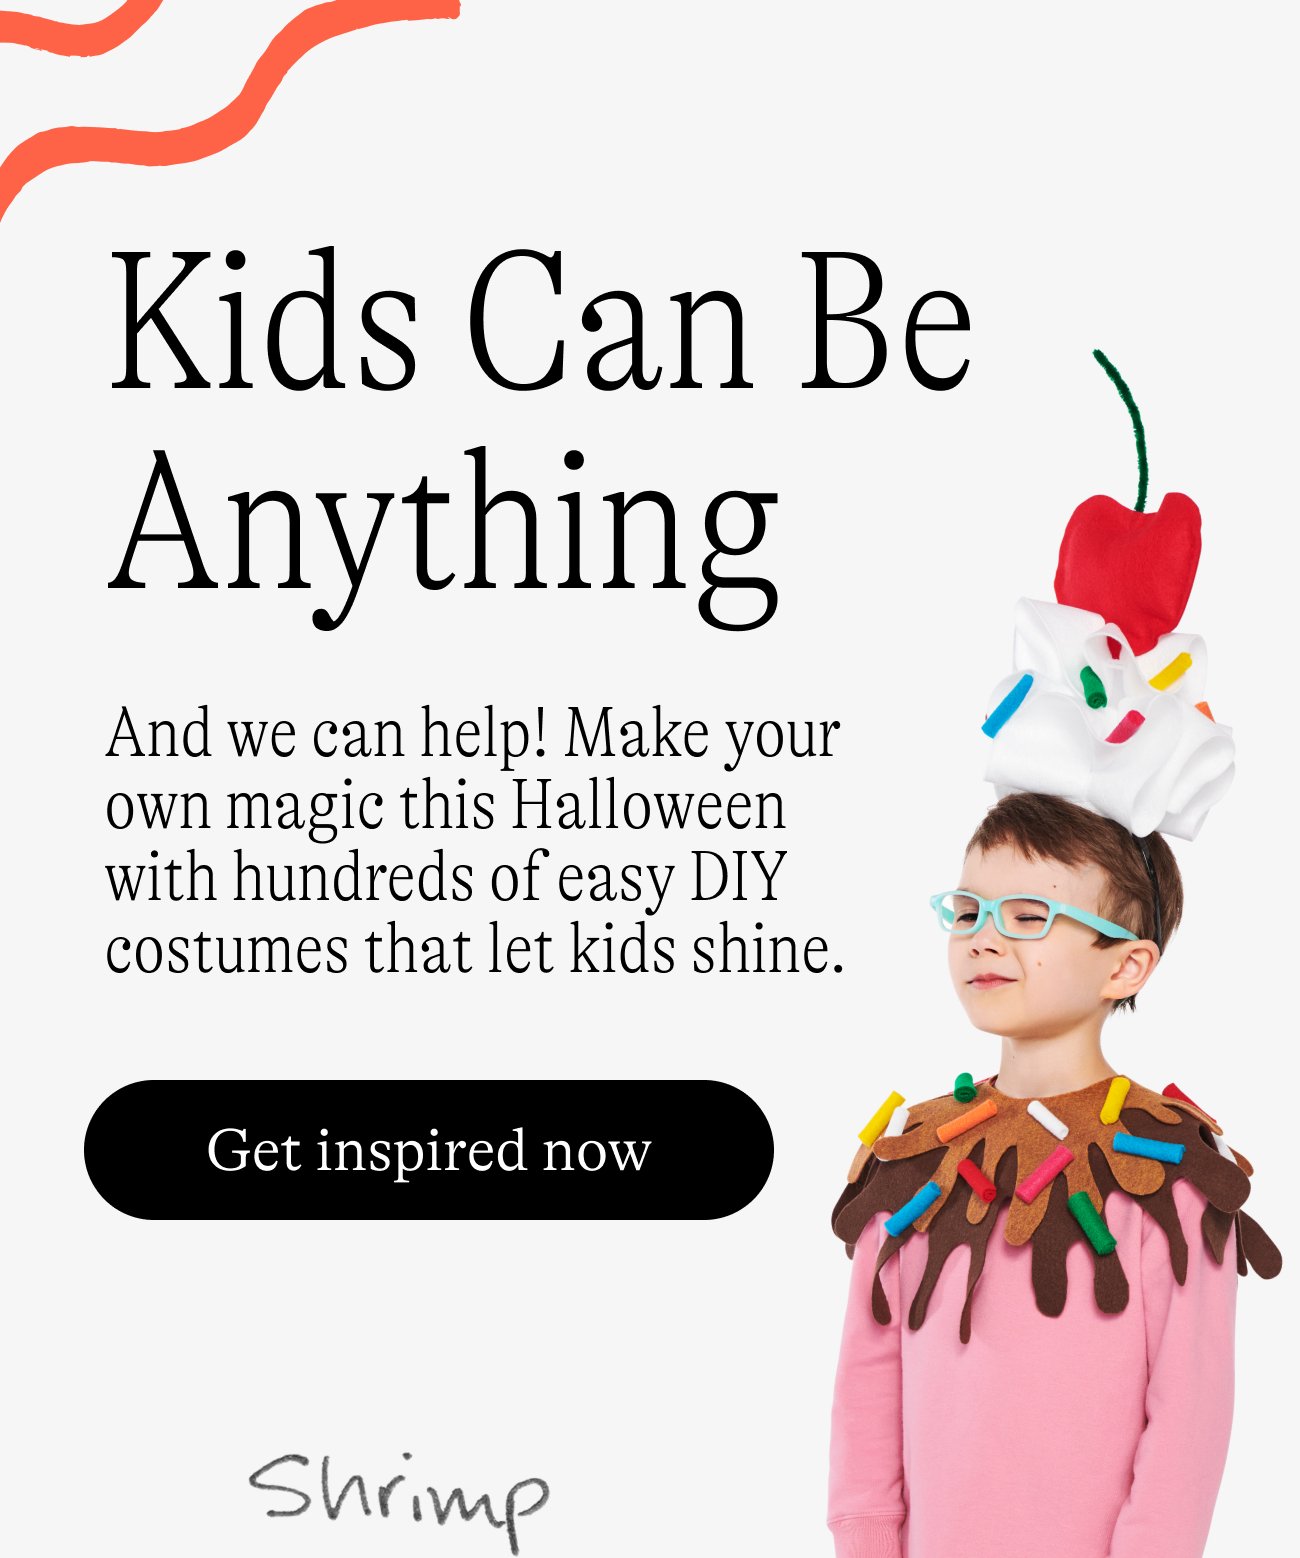 Kids Can Be Anything. And we can help! Make your own magic this Halloween with hundreds of easy DIY costumes that let kids shine. Get inspired now.